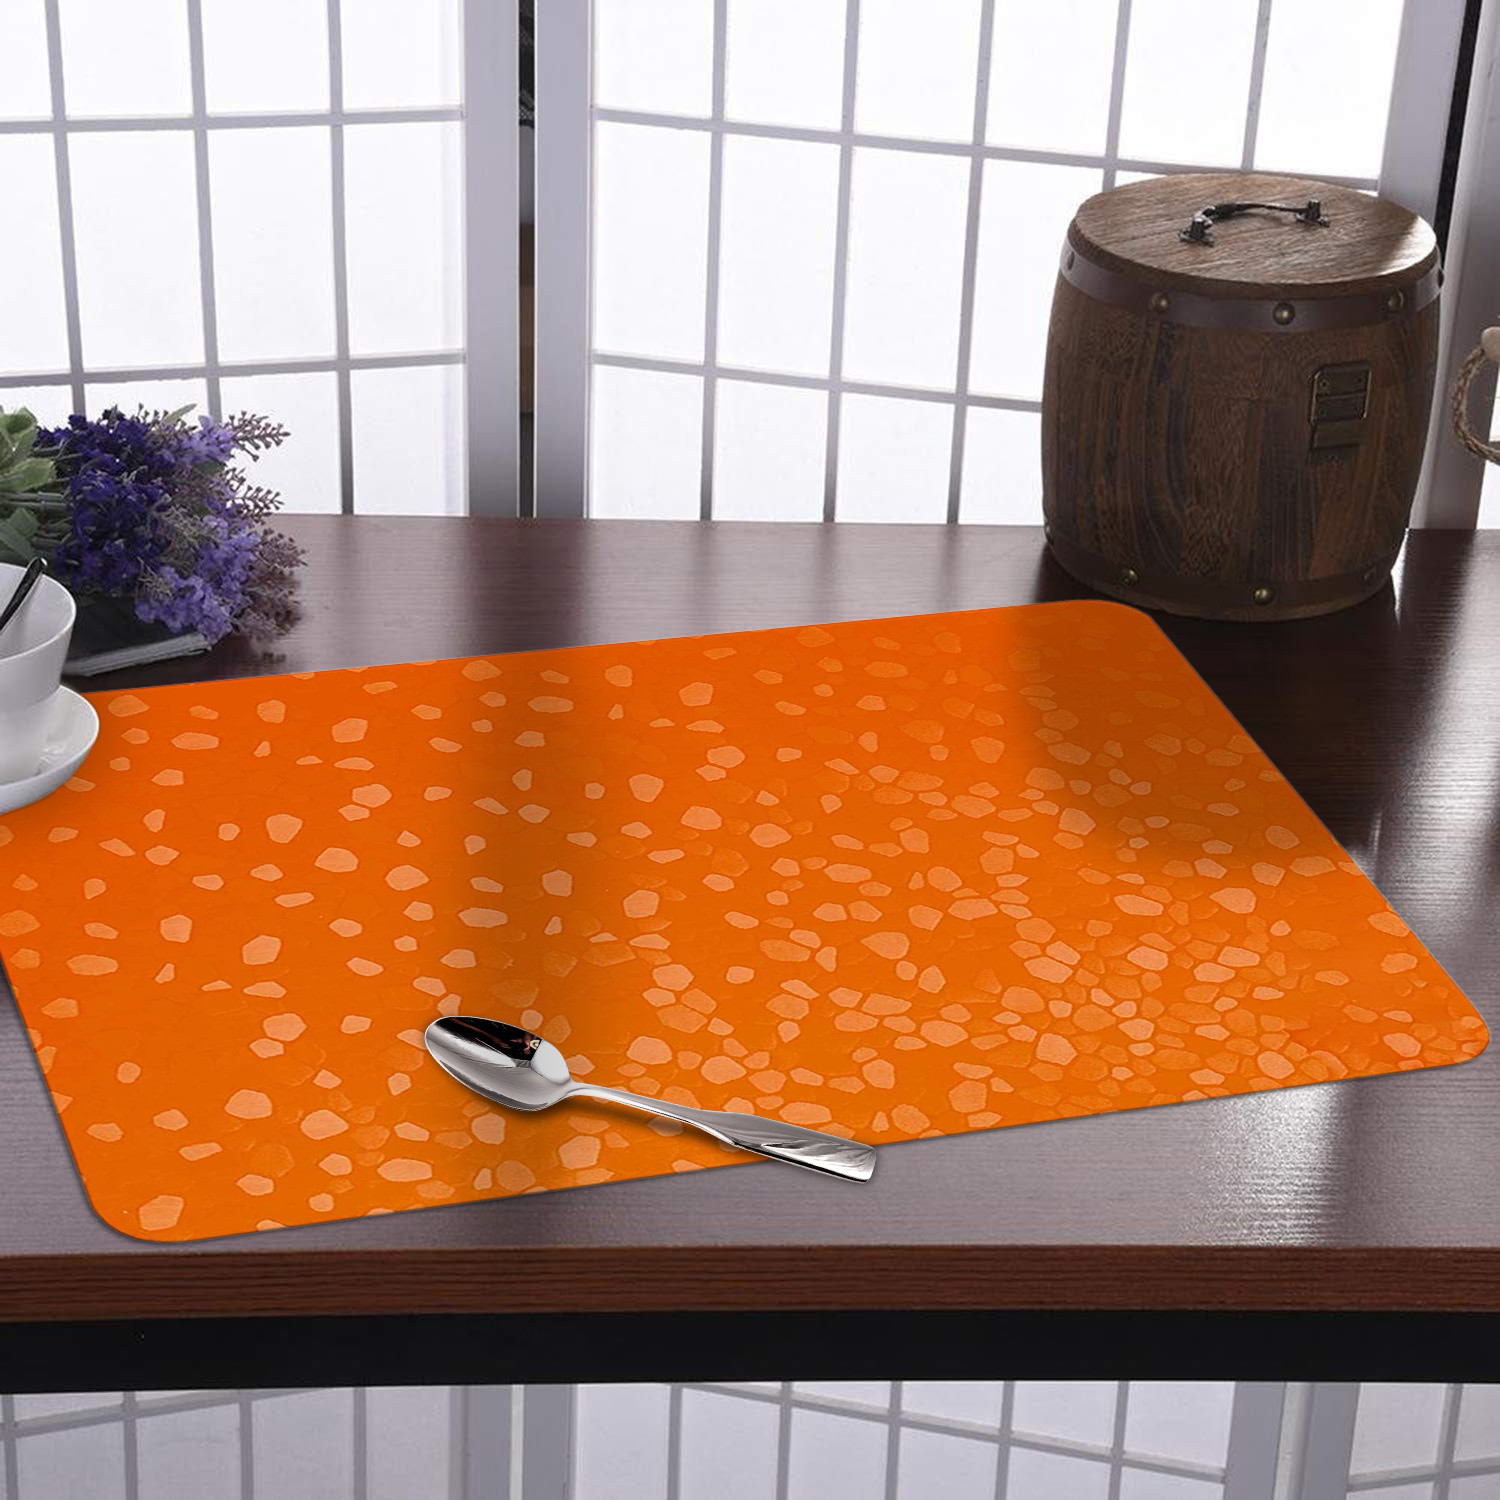 Kuber Industries Multiuses Stone Print PVC Table Placemat for kitchen, Dining Table Set of 6 (Orange)